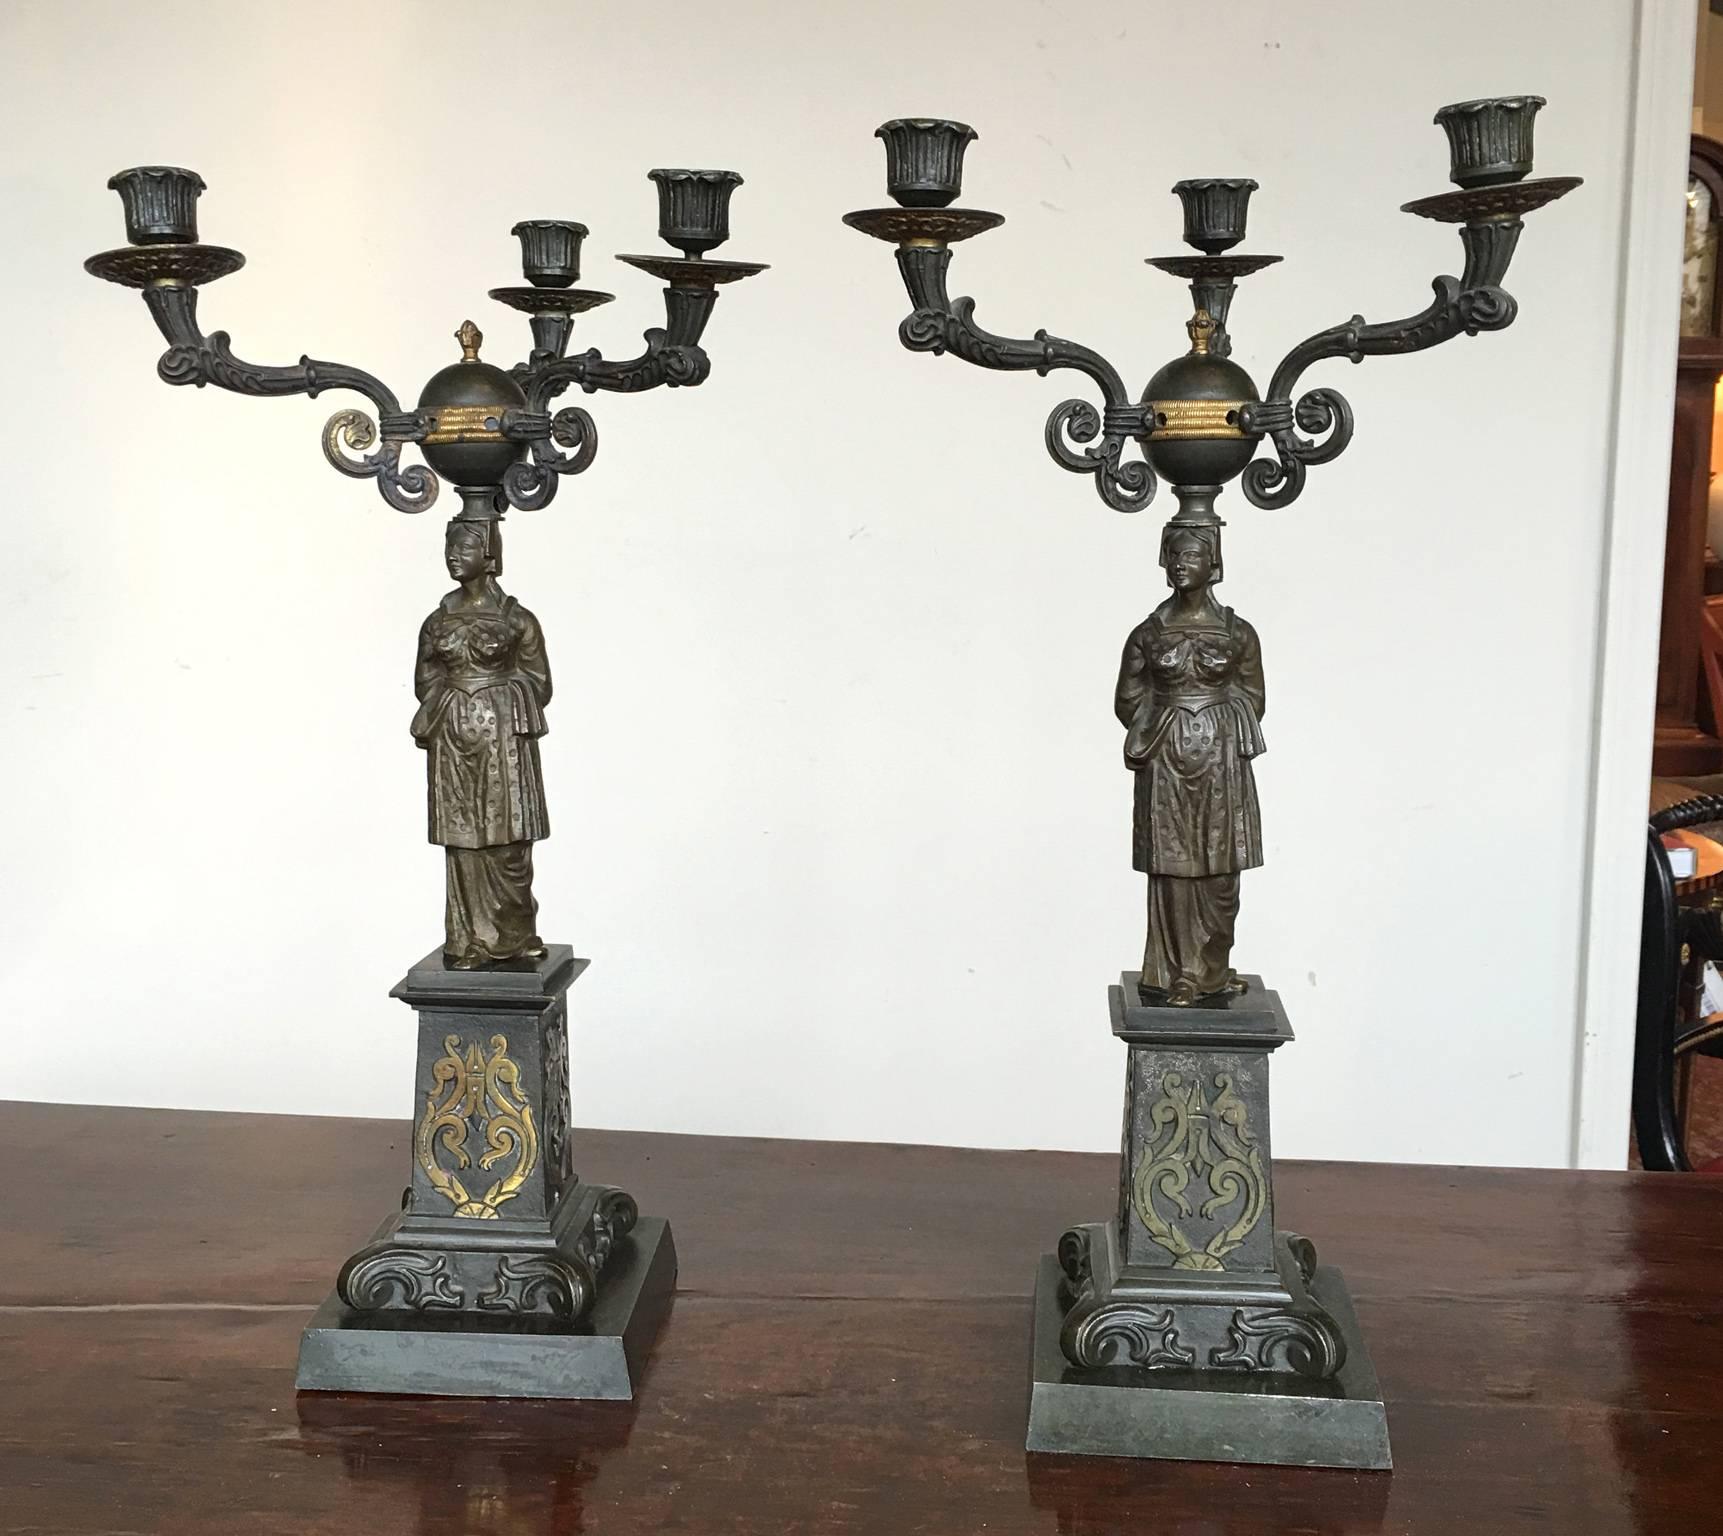 A large and impressive pair of mid-19th century cast iron and bronze candelabra depicting classical female figures.